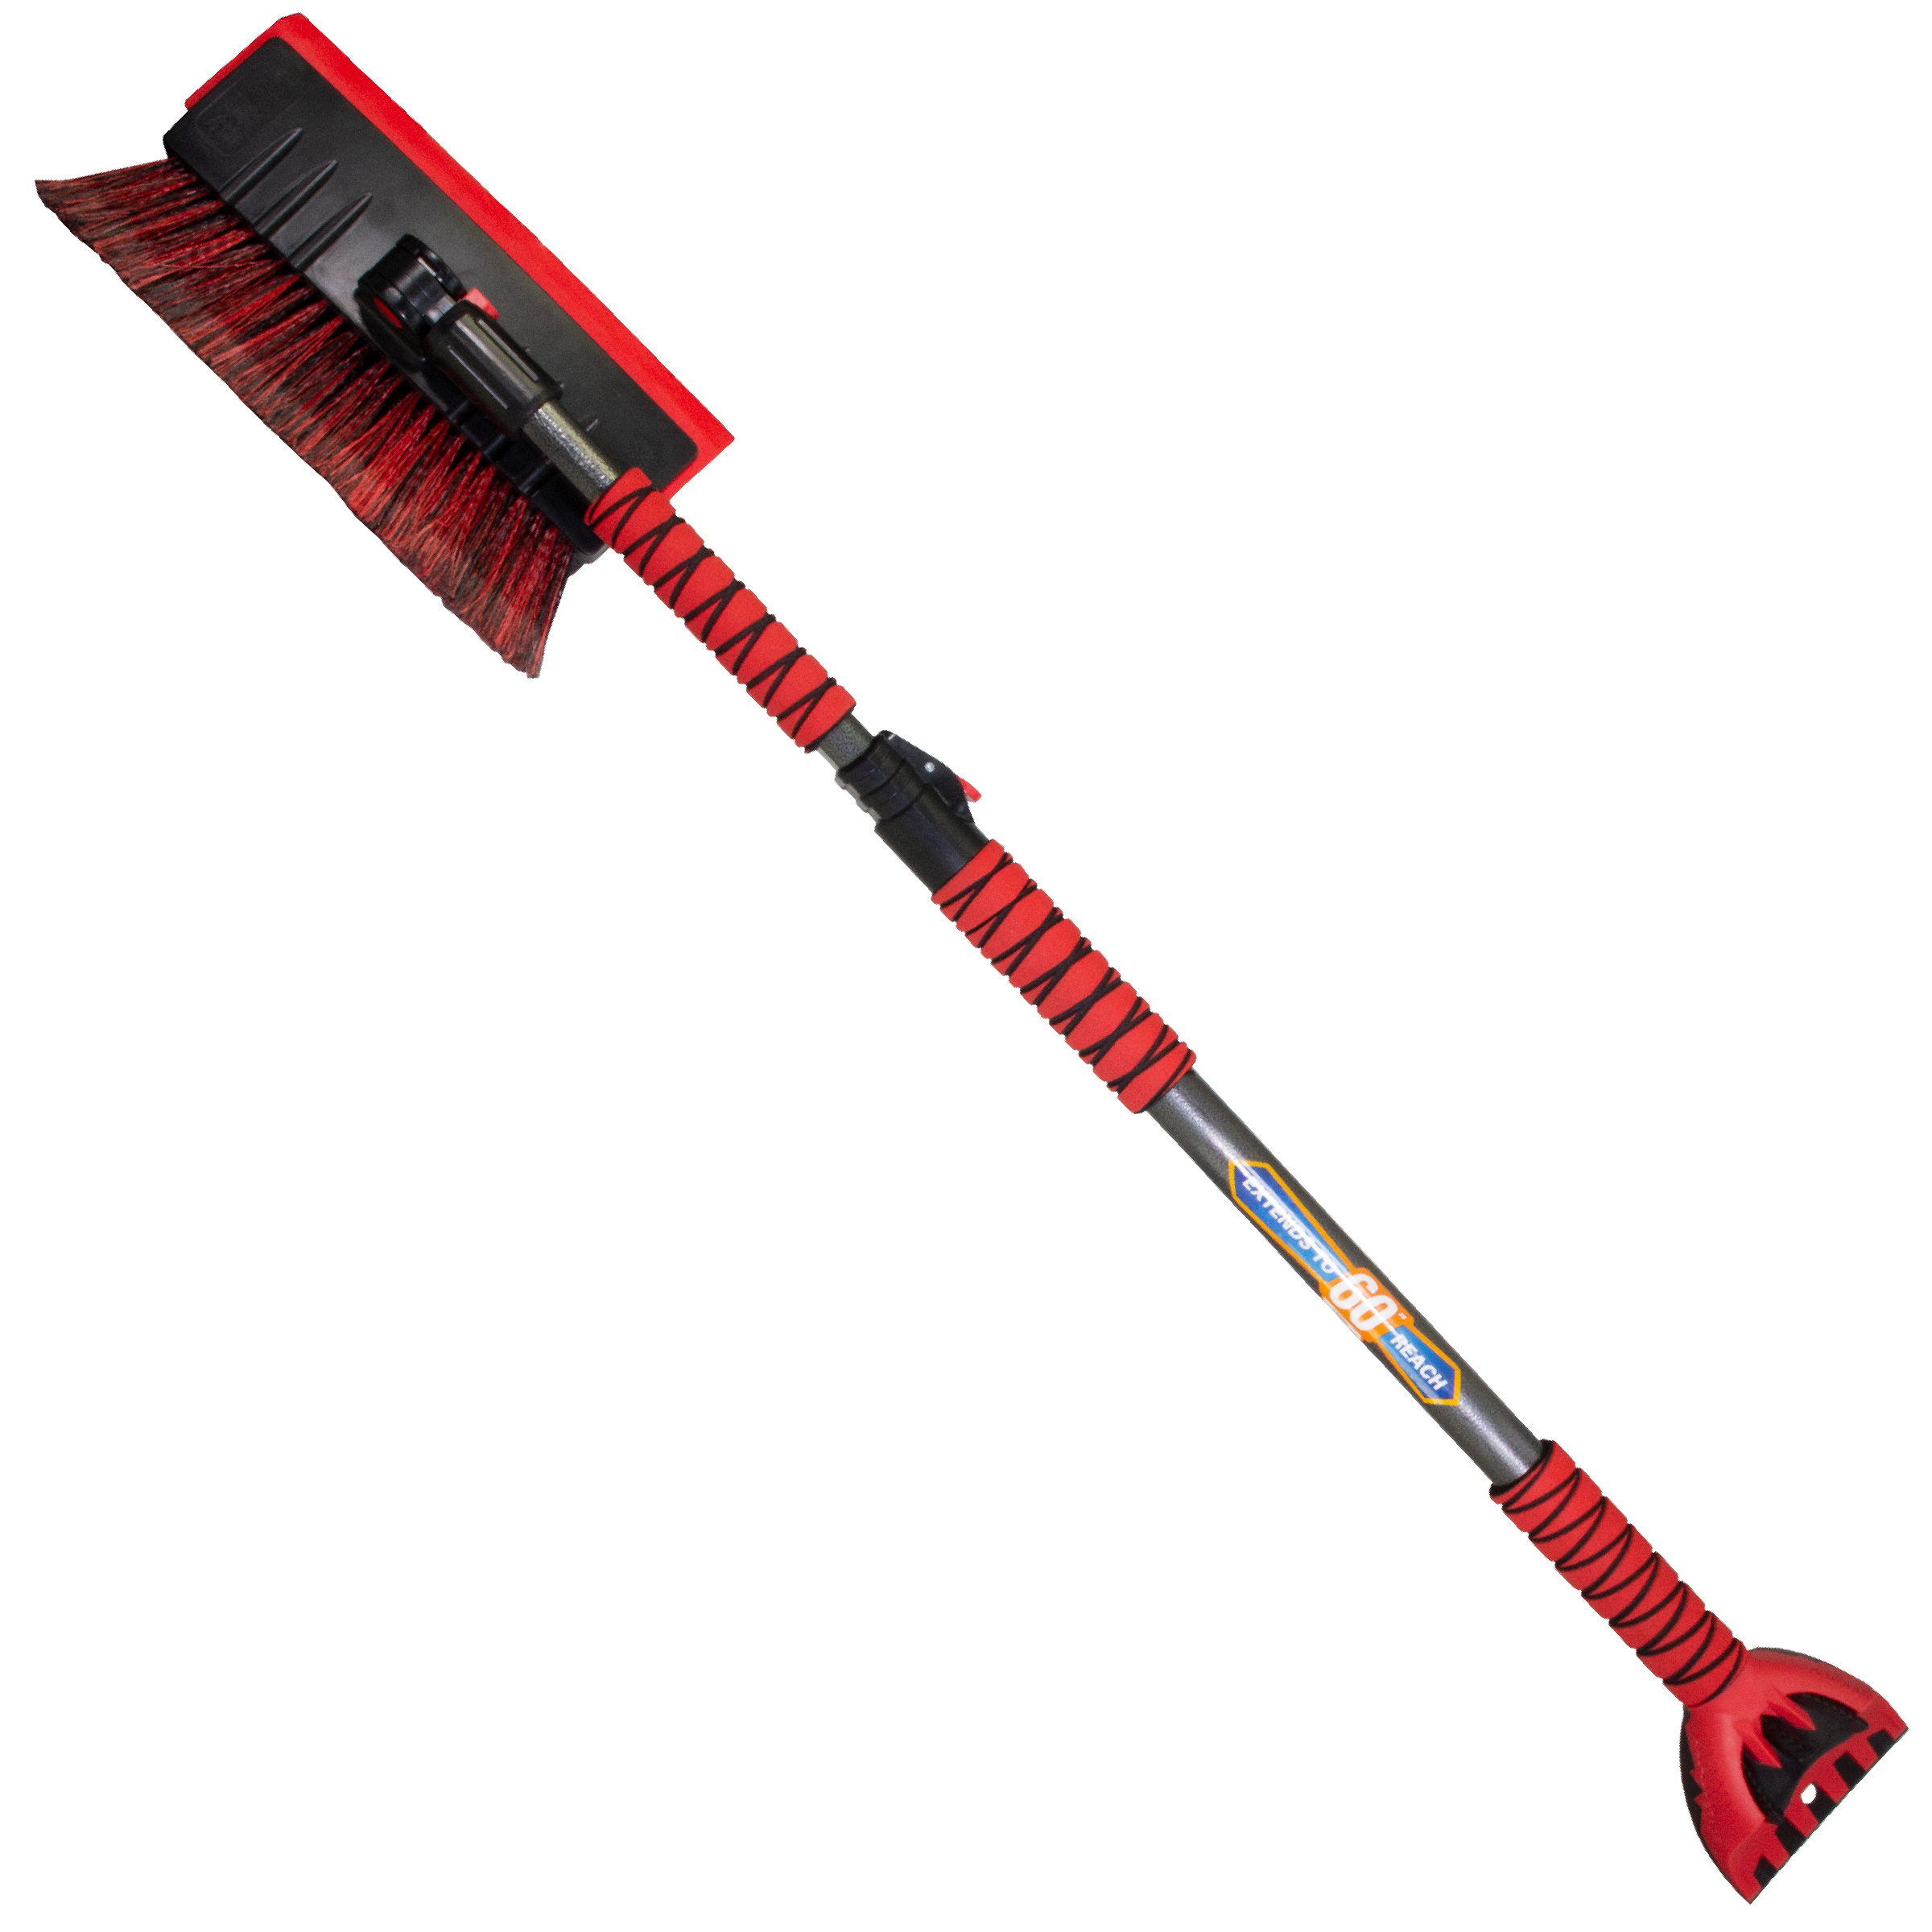 Subzero 60" Maxx Force Snowbroom with Ice Scraper, Red and Black, 1 Pack, 1220141061 - image 1 of 7